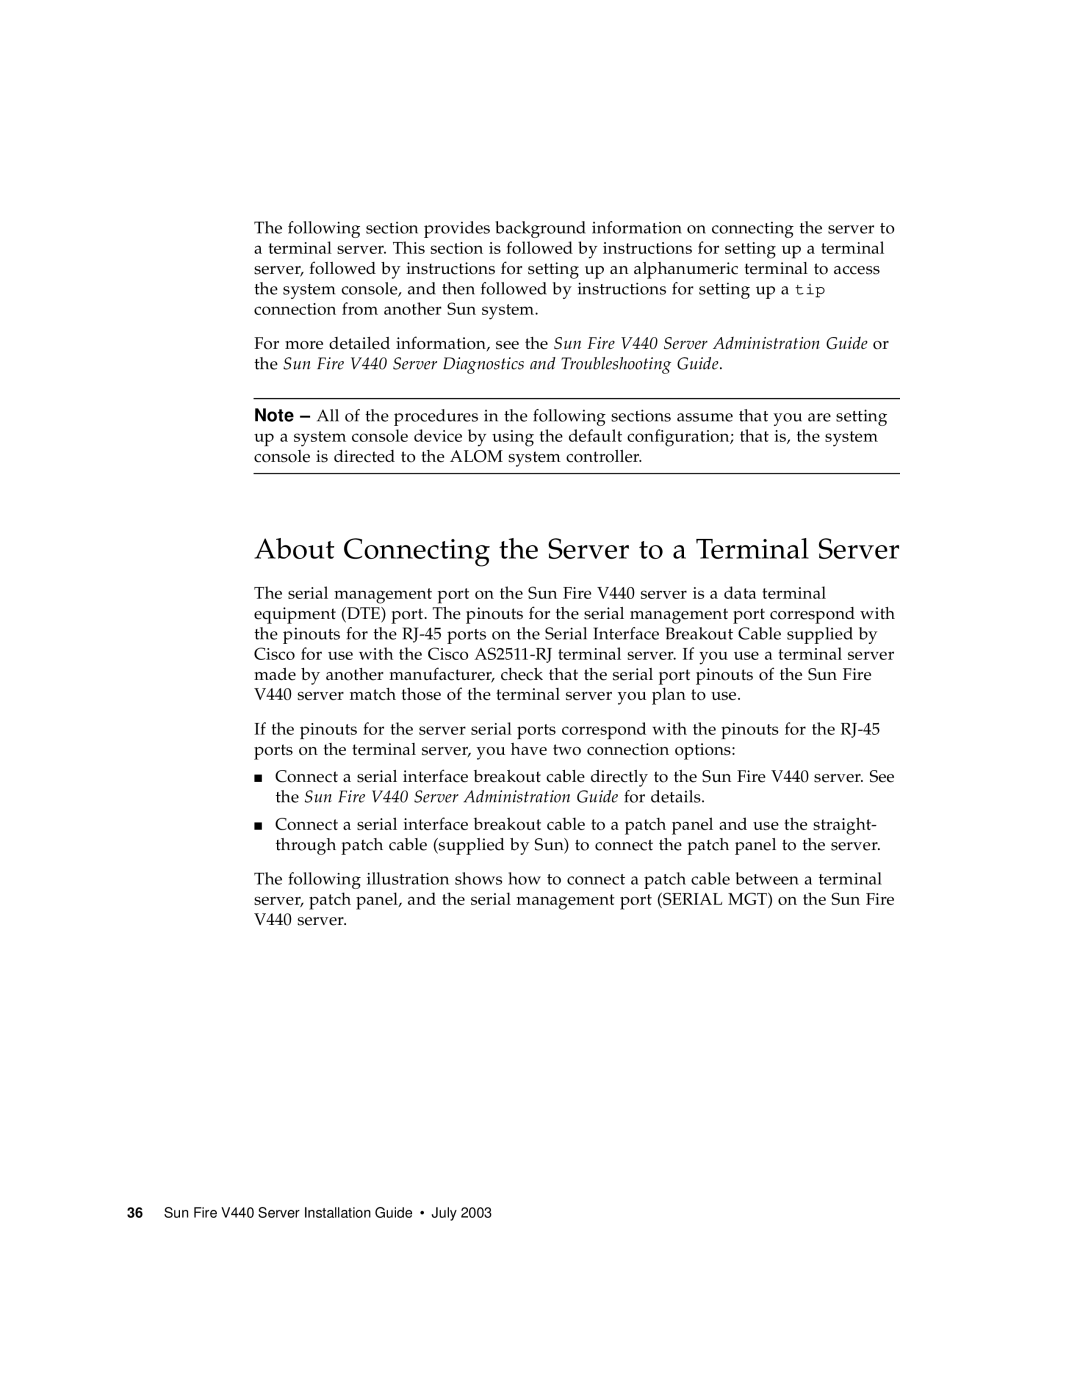 Sun Microsystems 816-7727-10 manual About Connecting the Server to a Terminal Server 